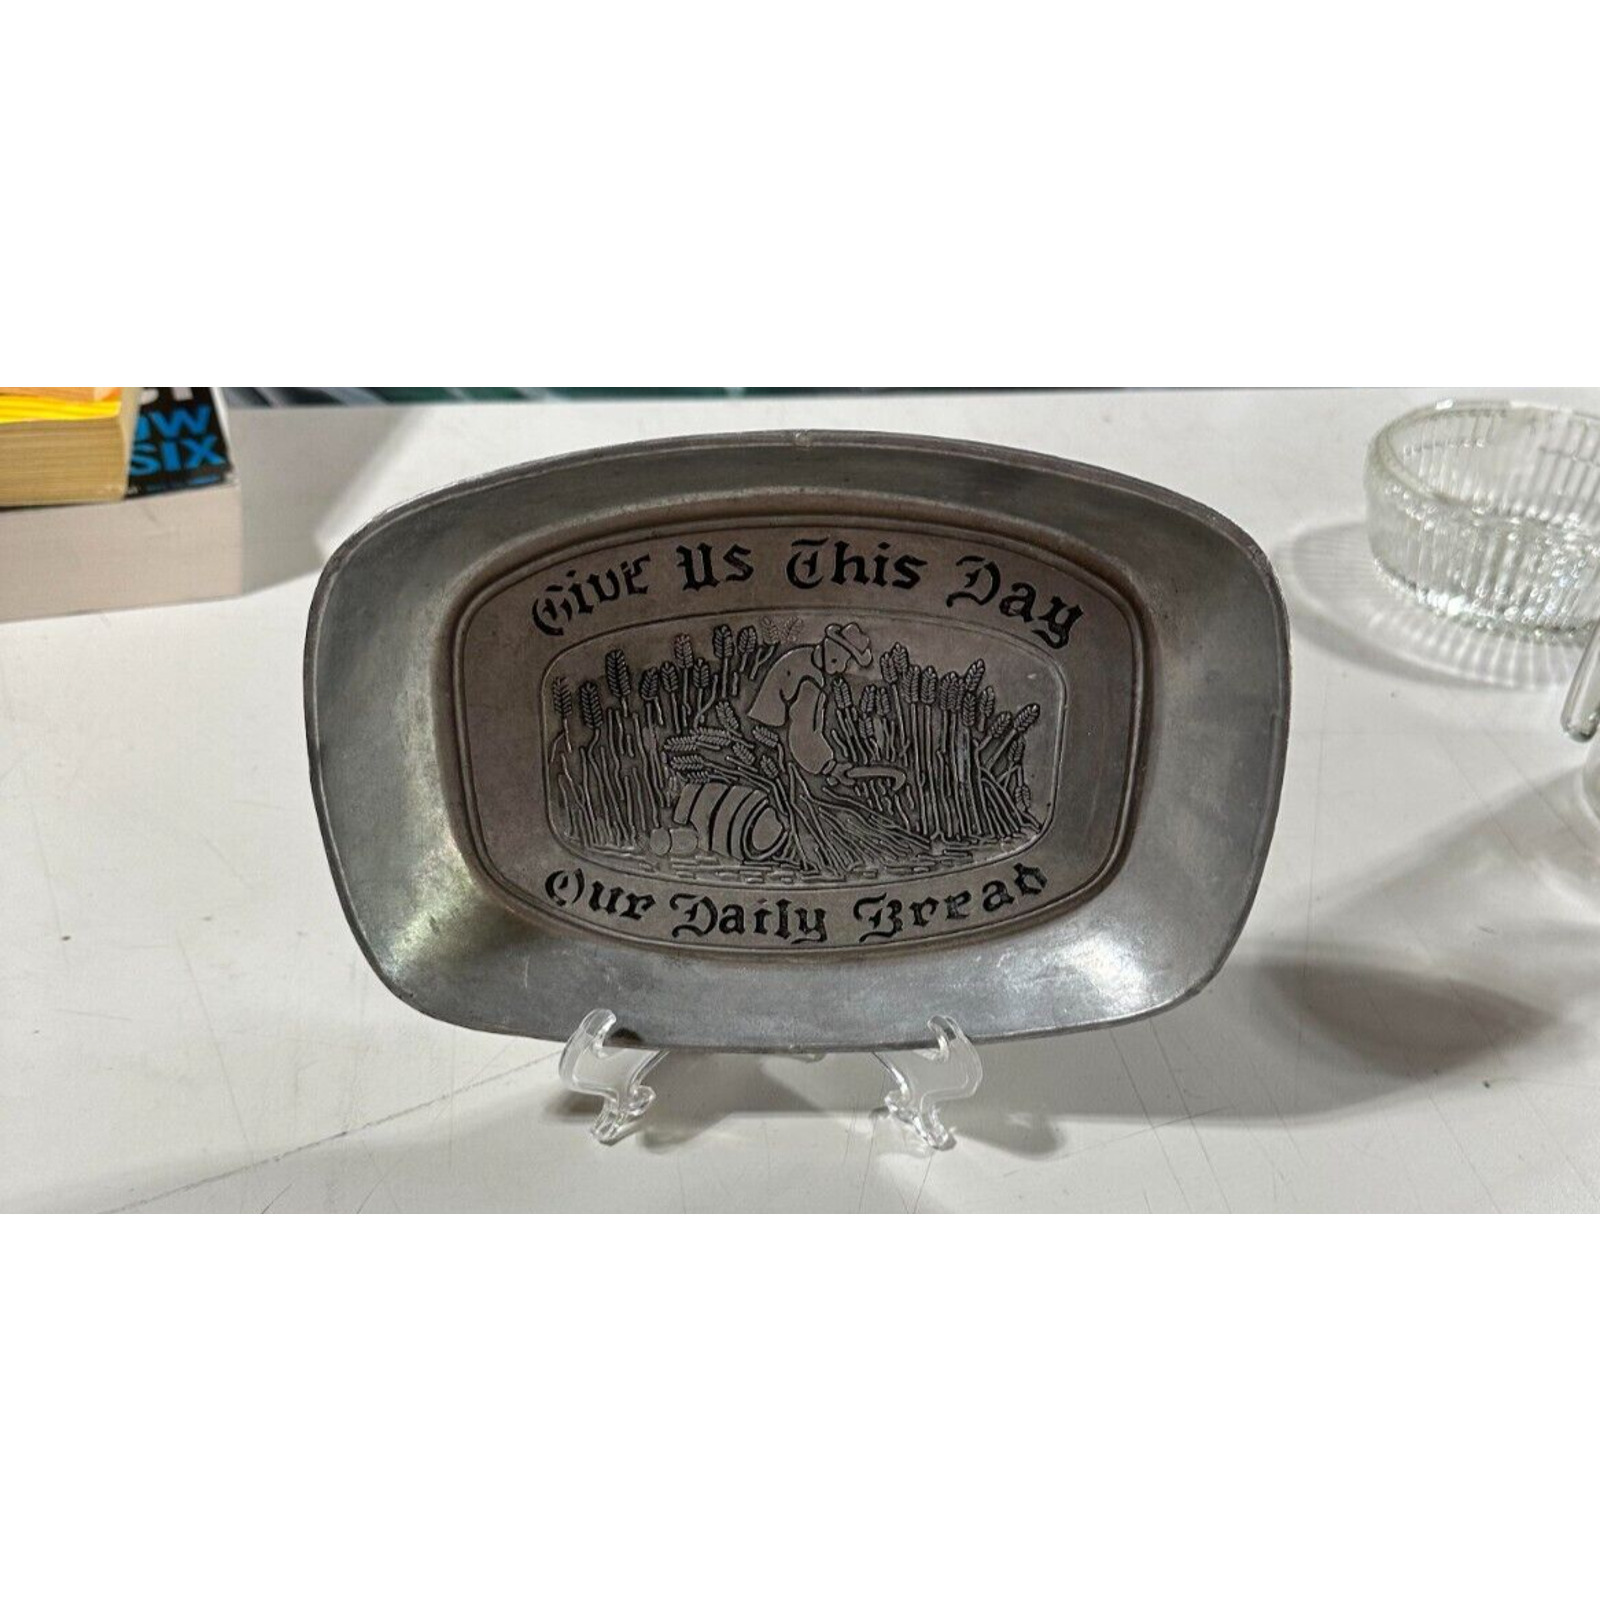 Give Us This Day Our Daily Bread Pewter Tray Carson Collectable Display Tray